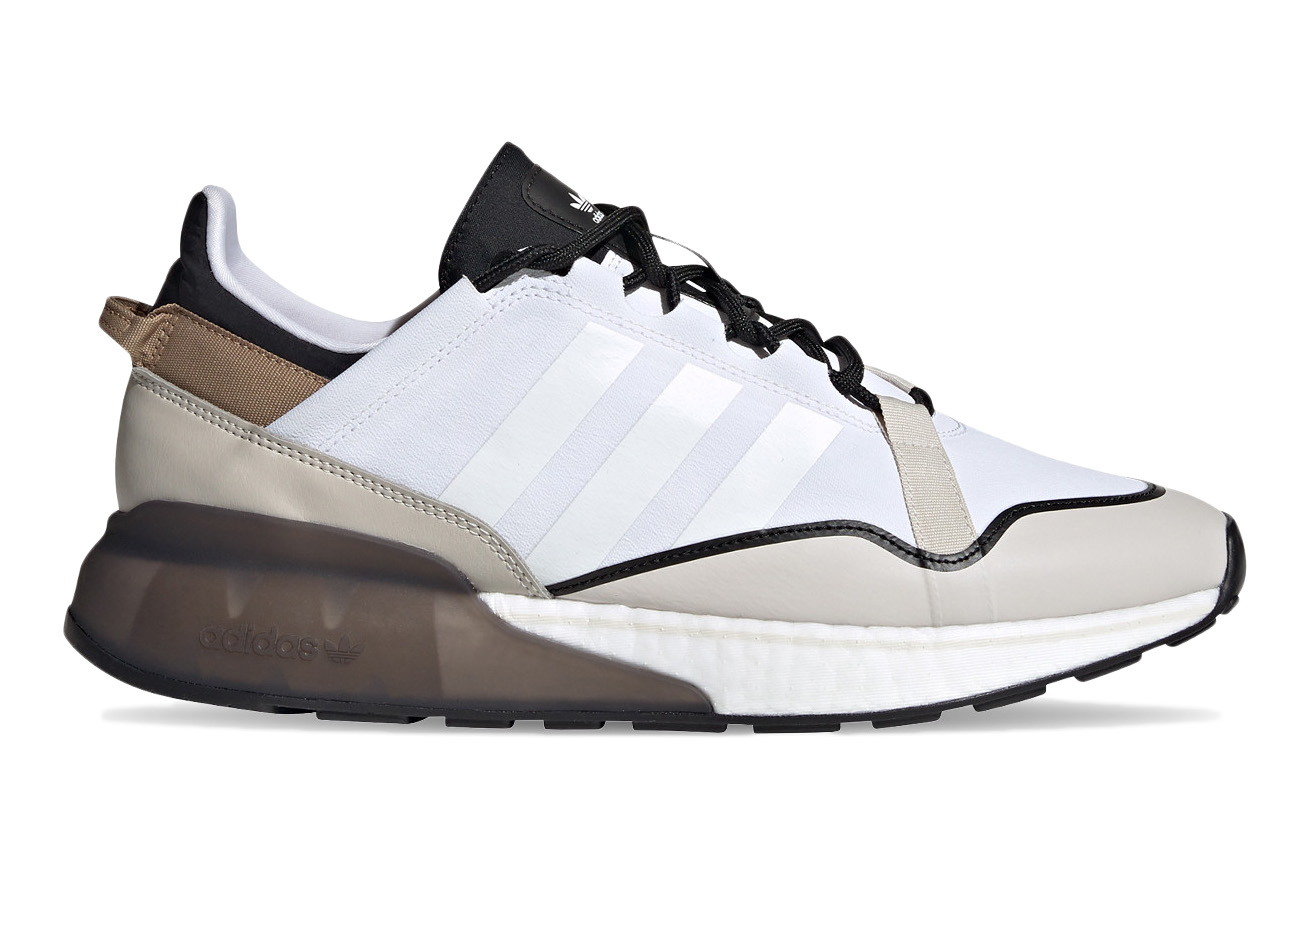 adidas ZX 2K Boost Pure White Brown Black メンズ - G57962 - JP